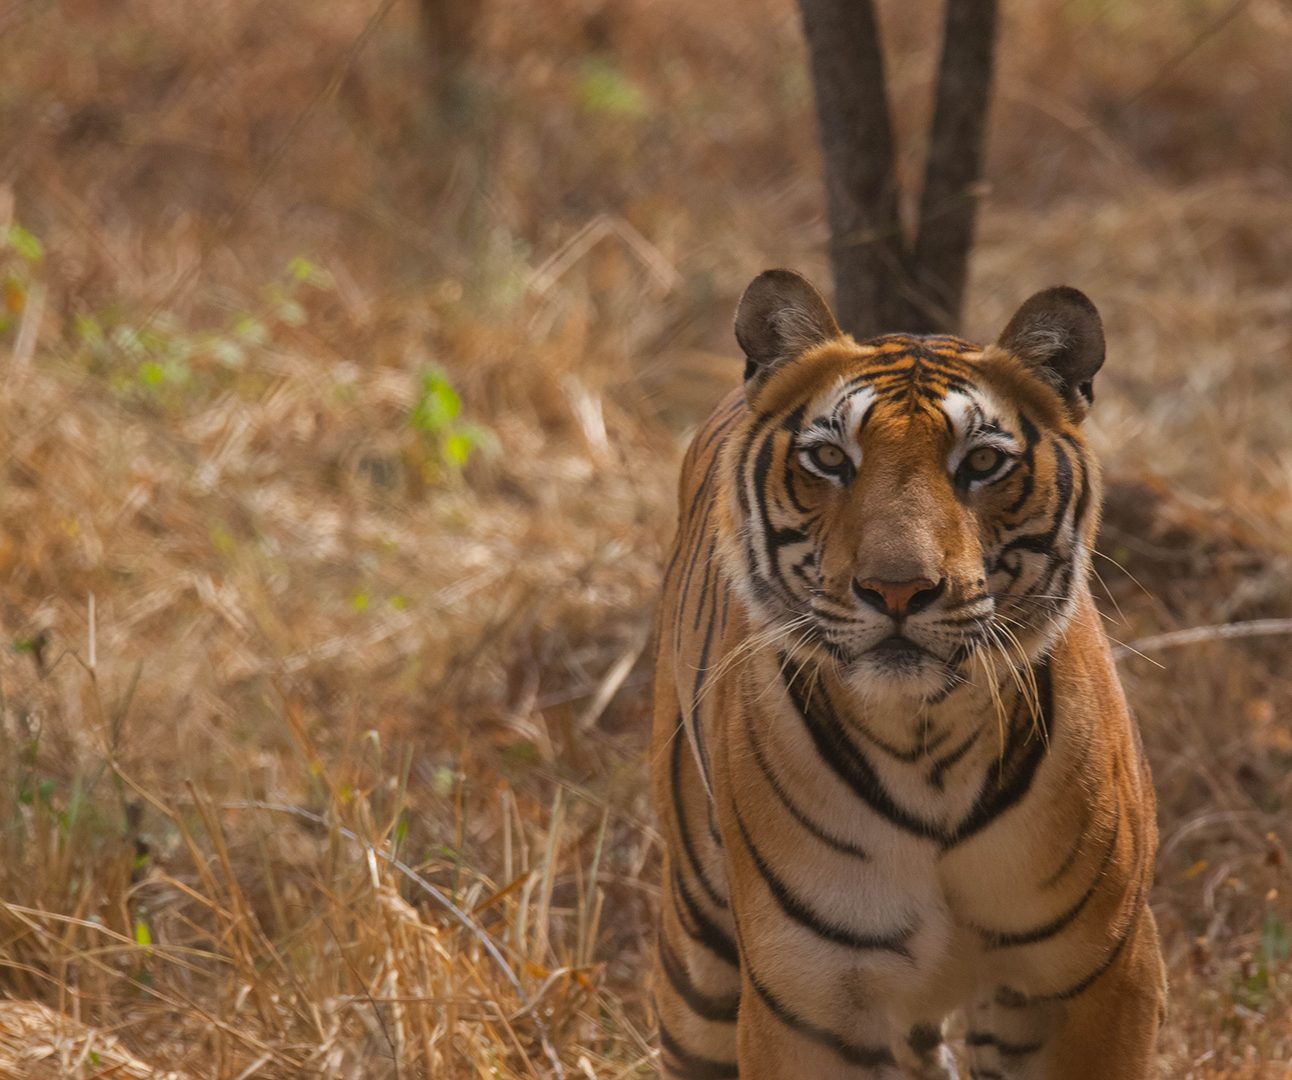 A Bengal tiger stands in tall, dry grass, looking at the camera